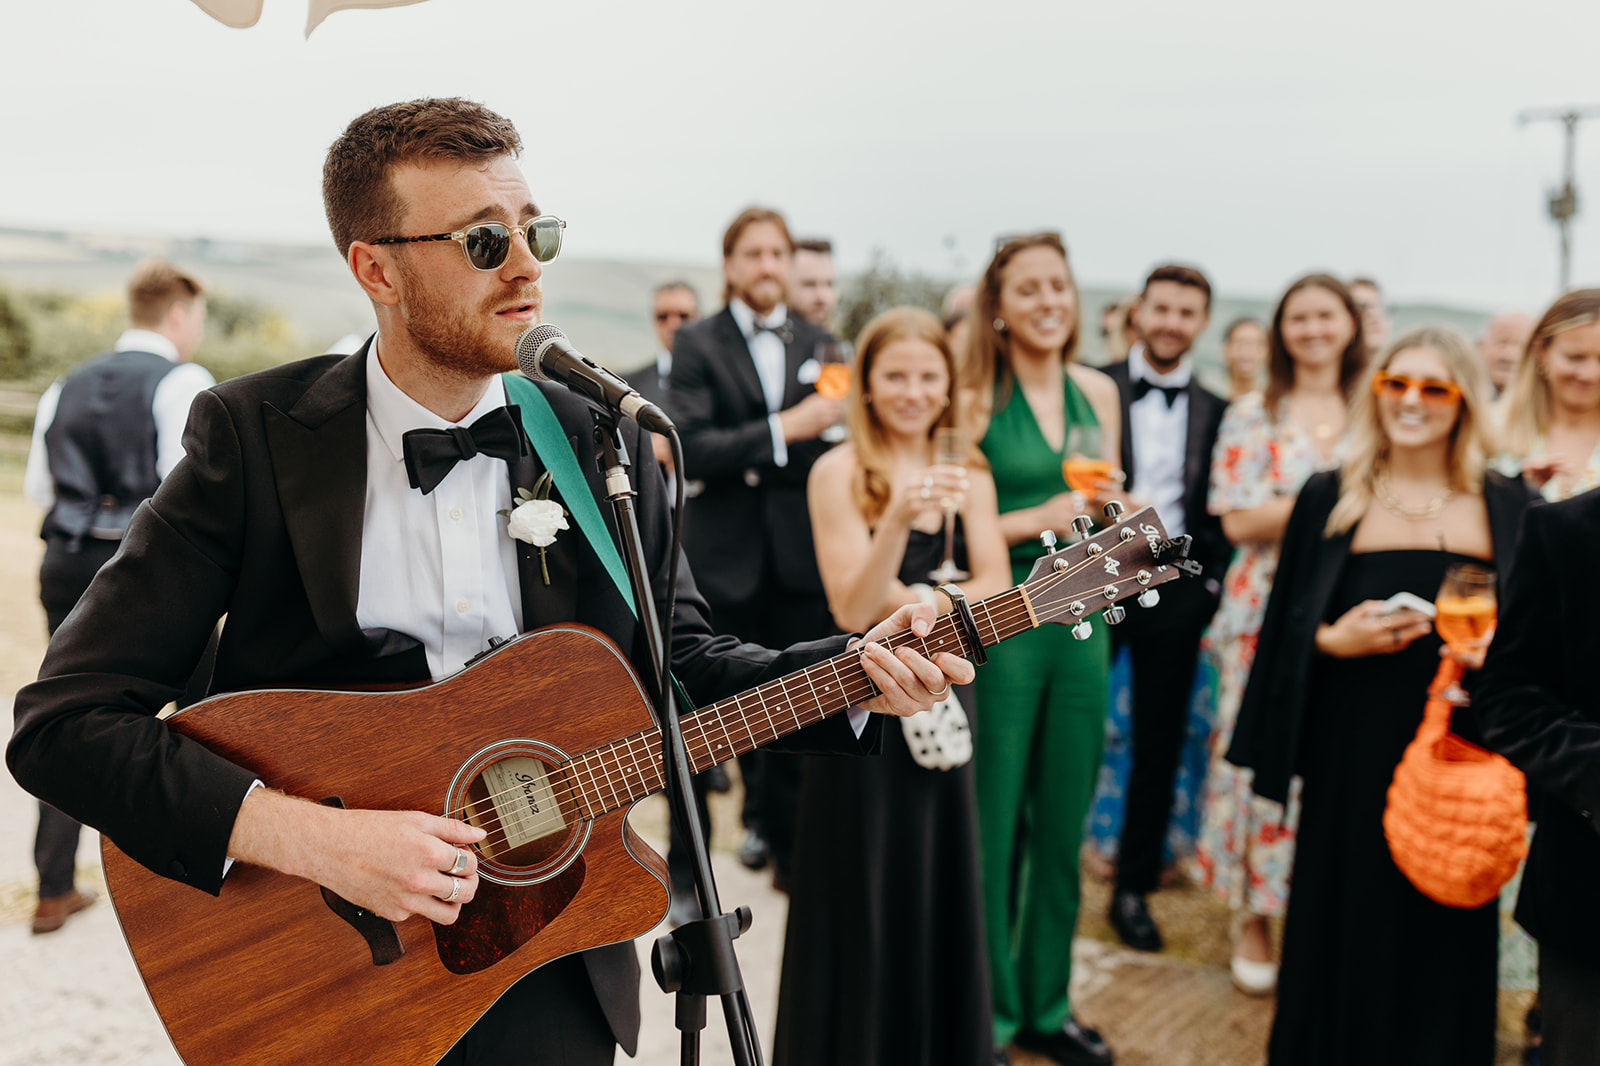 Groom's brother sings for couple as they arrive at wedding reception